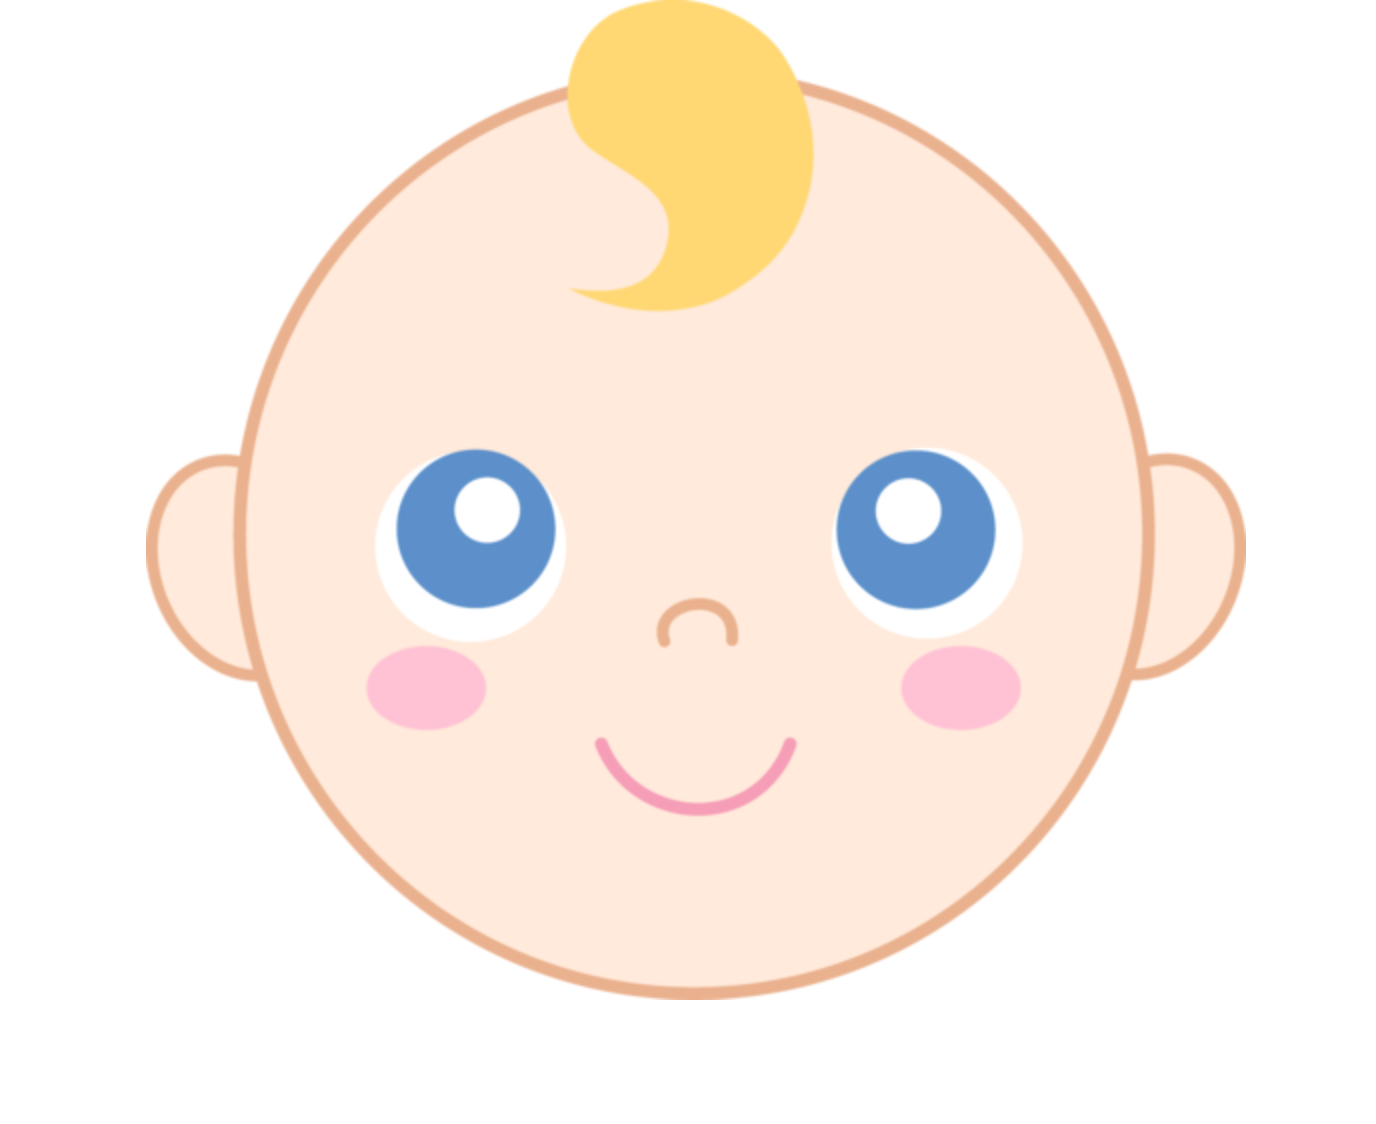 Baby Face - ClipArt Best